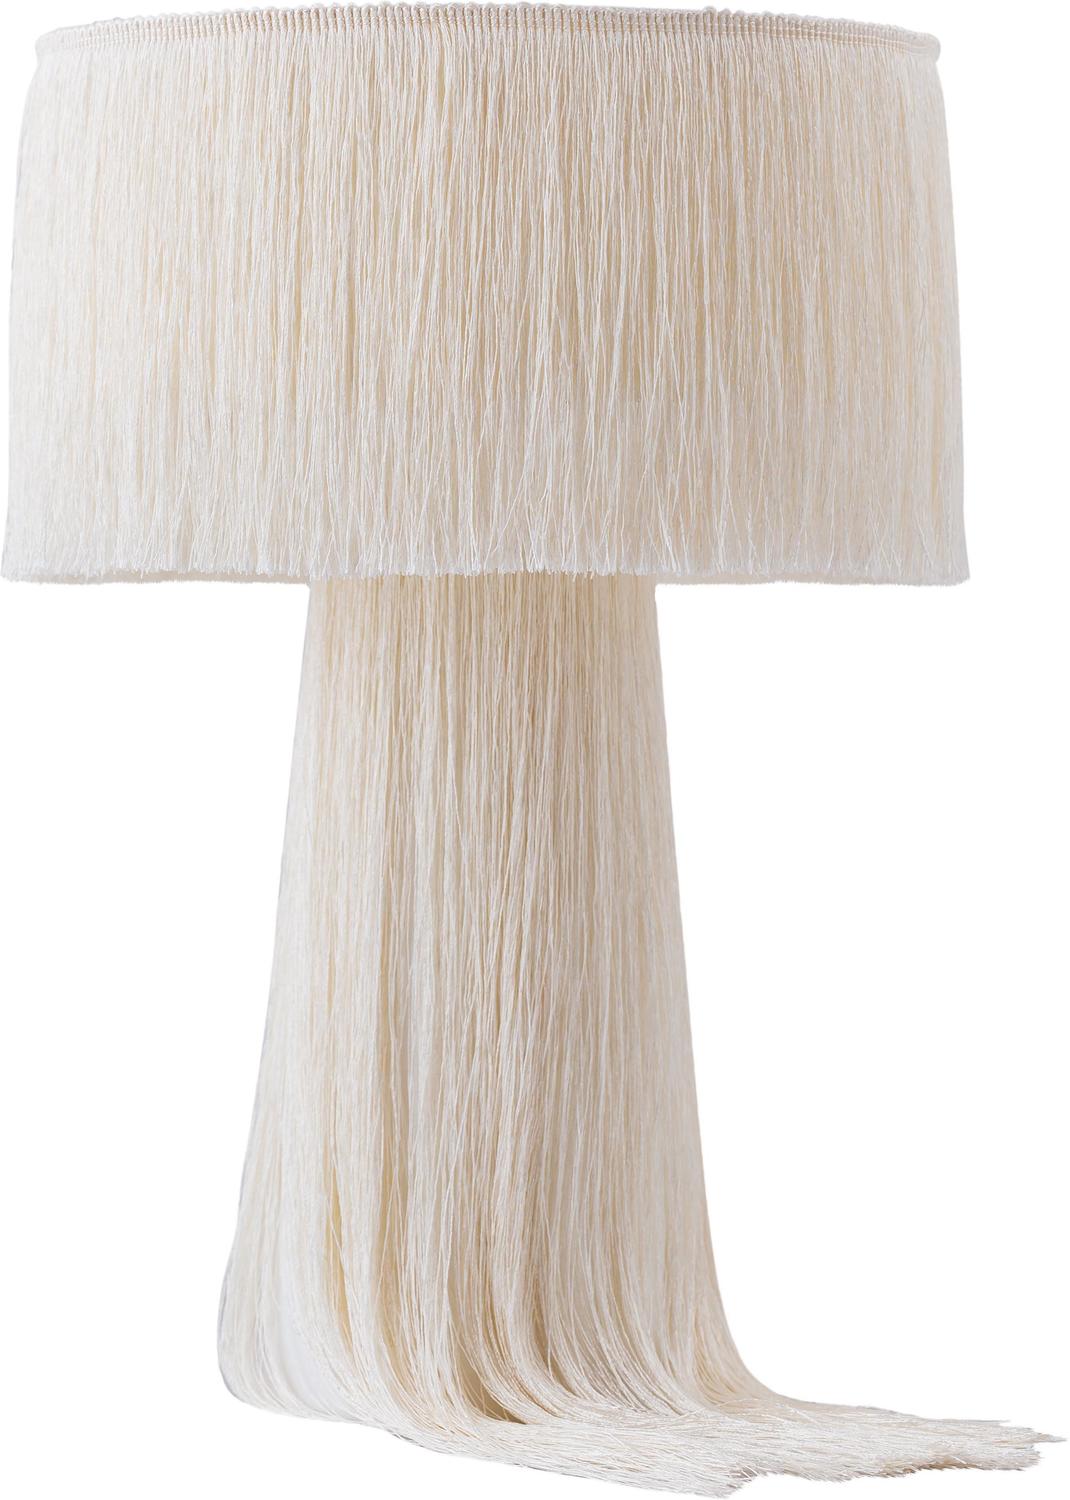 wood end table Tov Furniture Table Lamps Accent Tables Cream